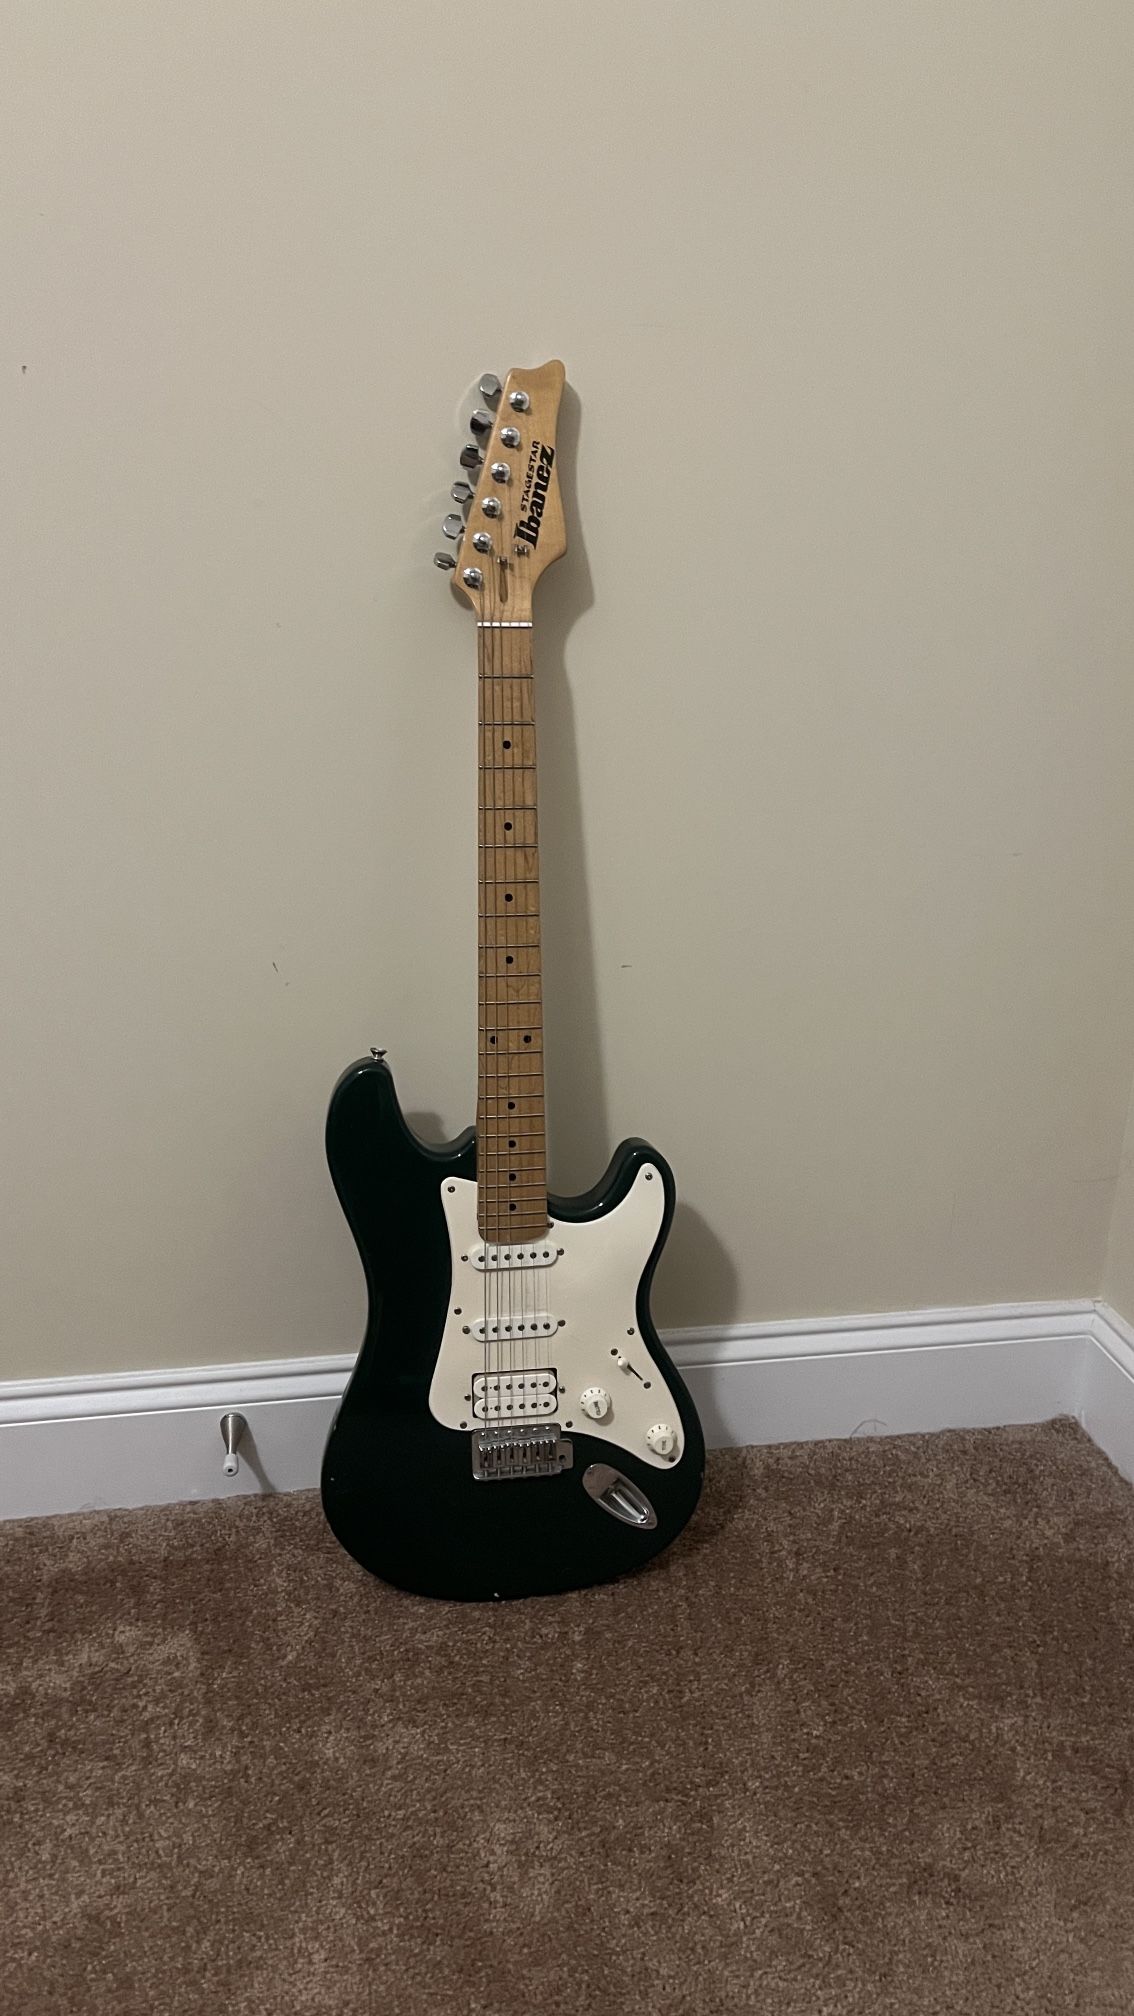 Ibanez Stagestar Electric guitar